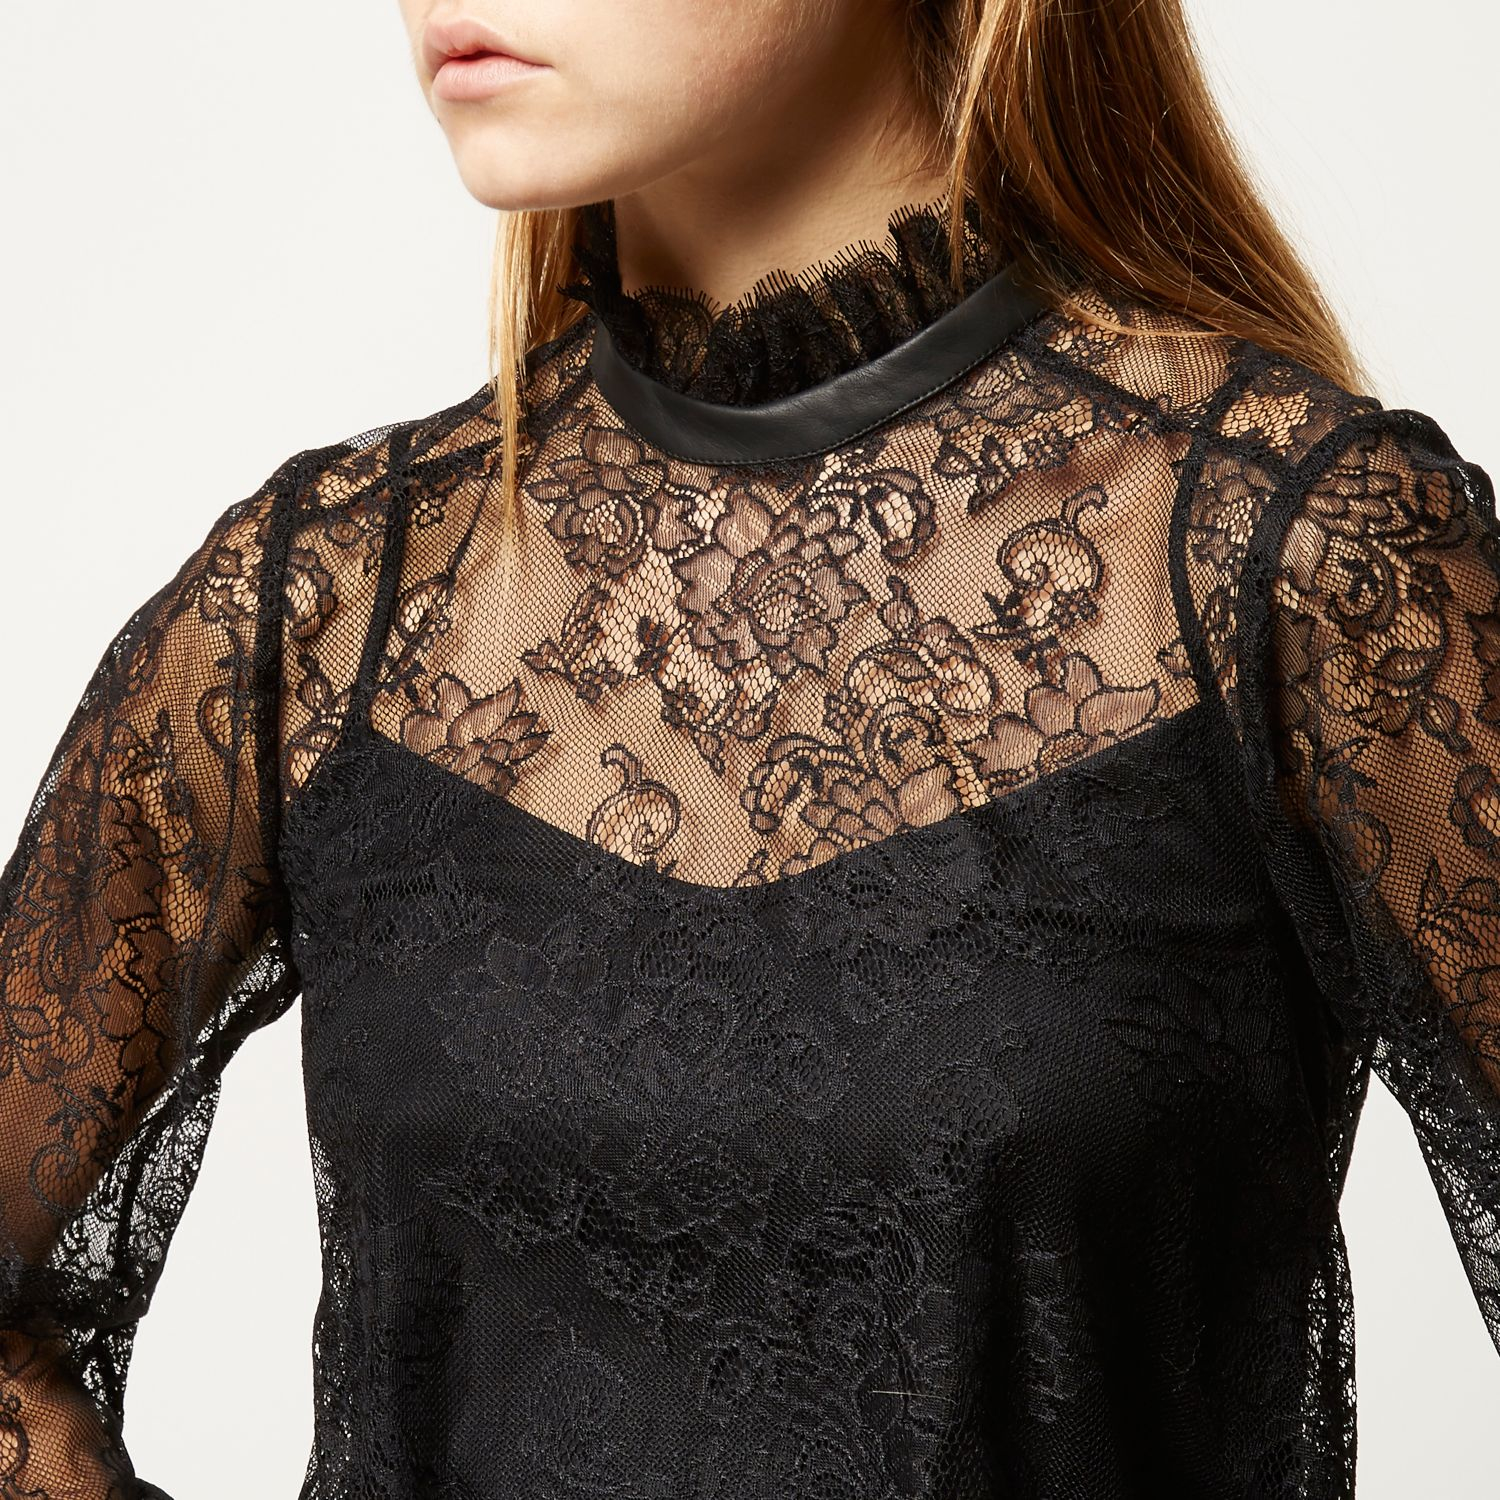 River Island Black Lace Victoriana High Neck Blouse in Black - Lyst